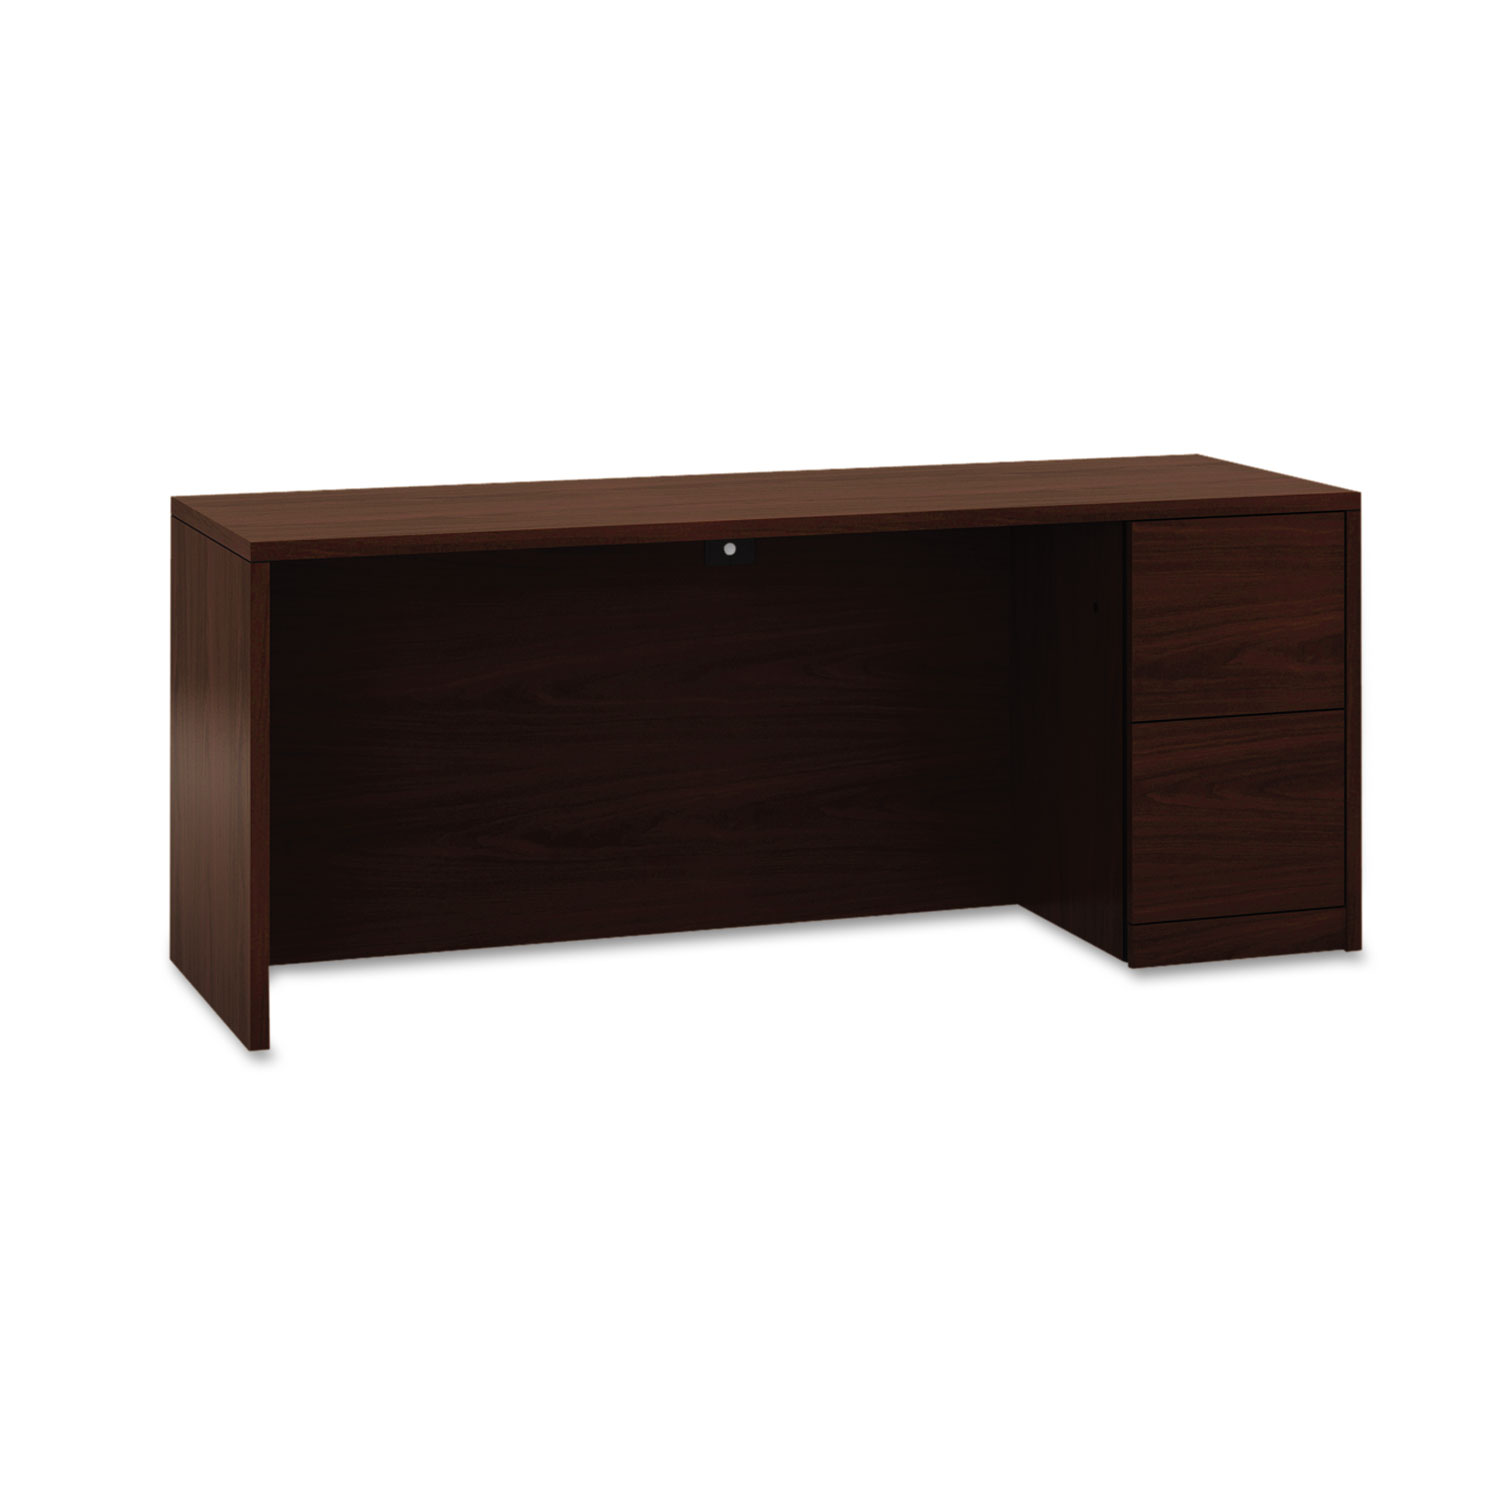 10500 Series Full-Height Left Ped Credenza, 72 x 24 x 29-1/2, Bourbon Cherry